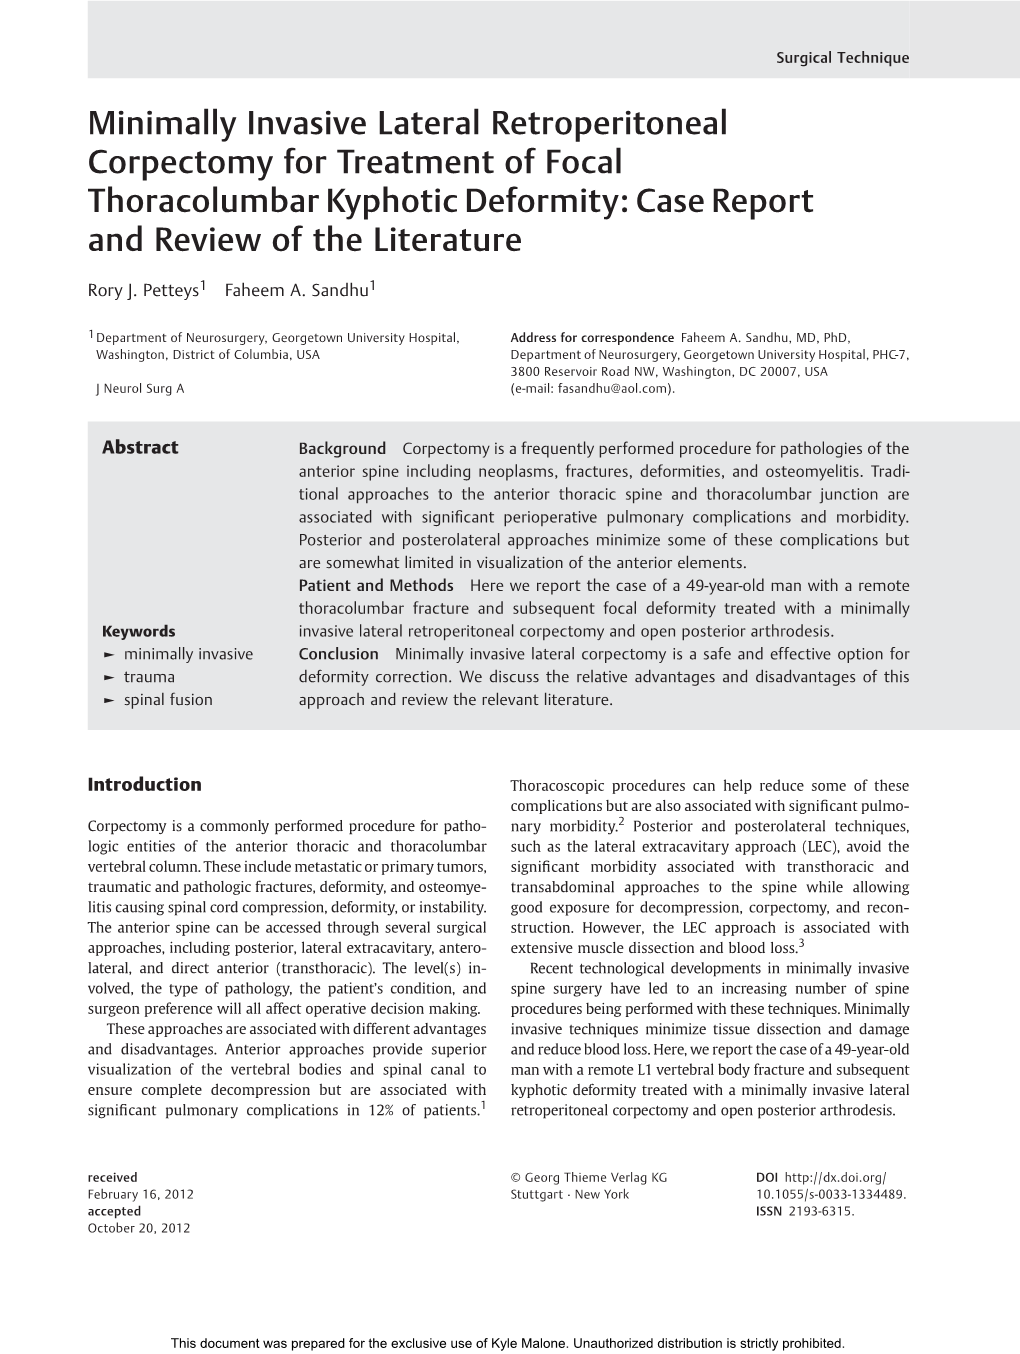 Case Report and Review of the Literature